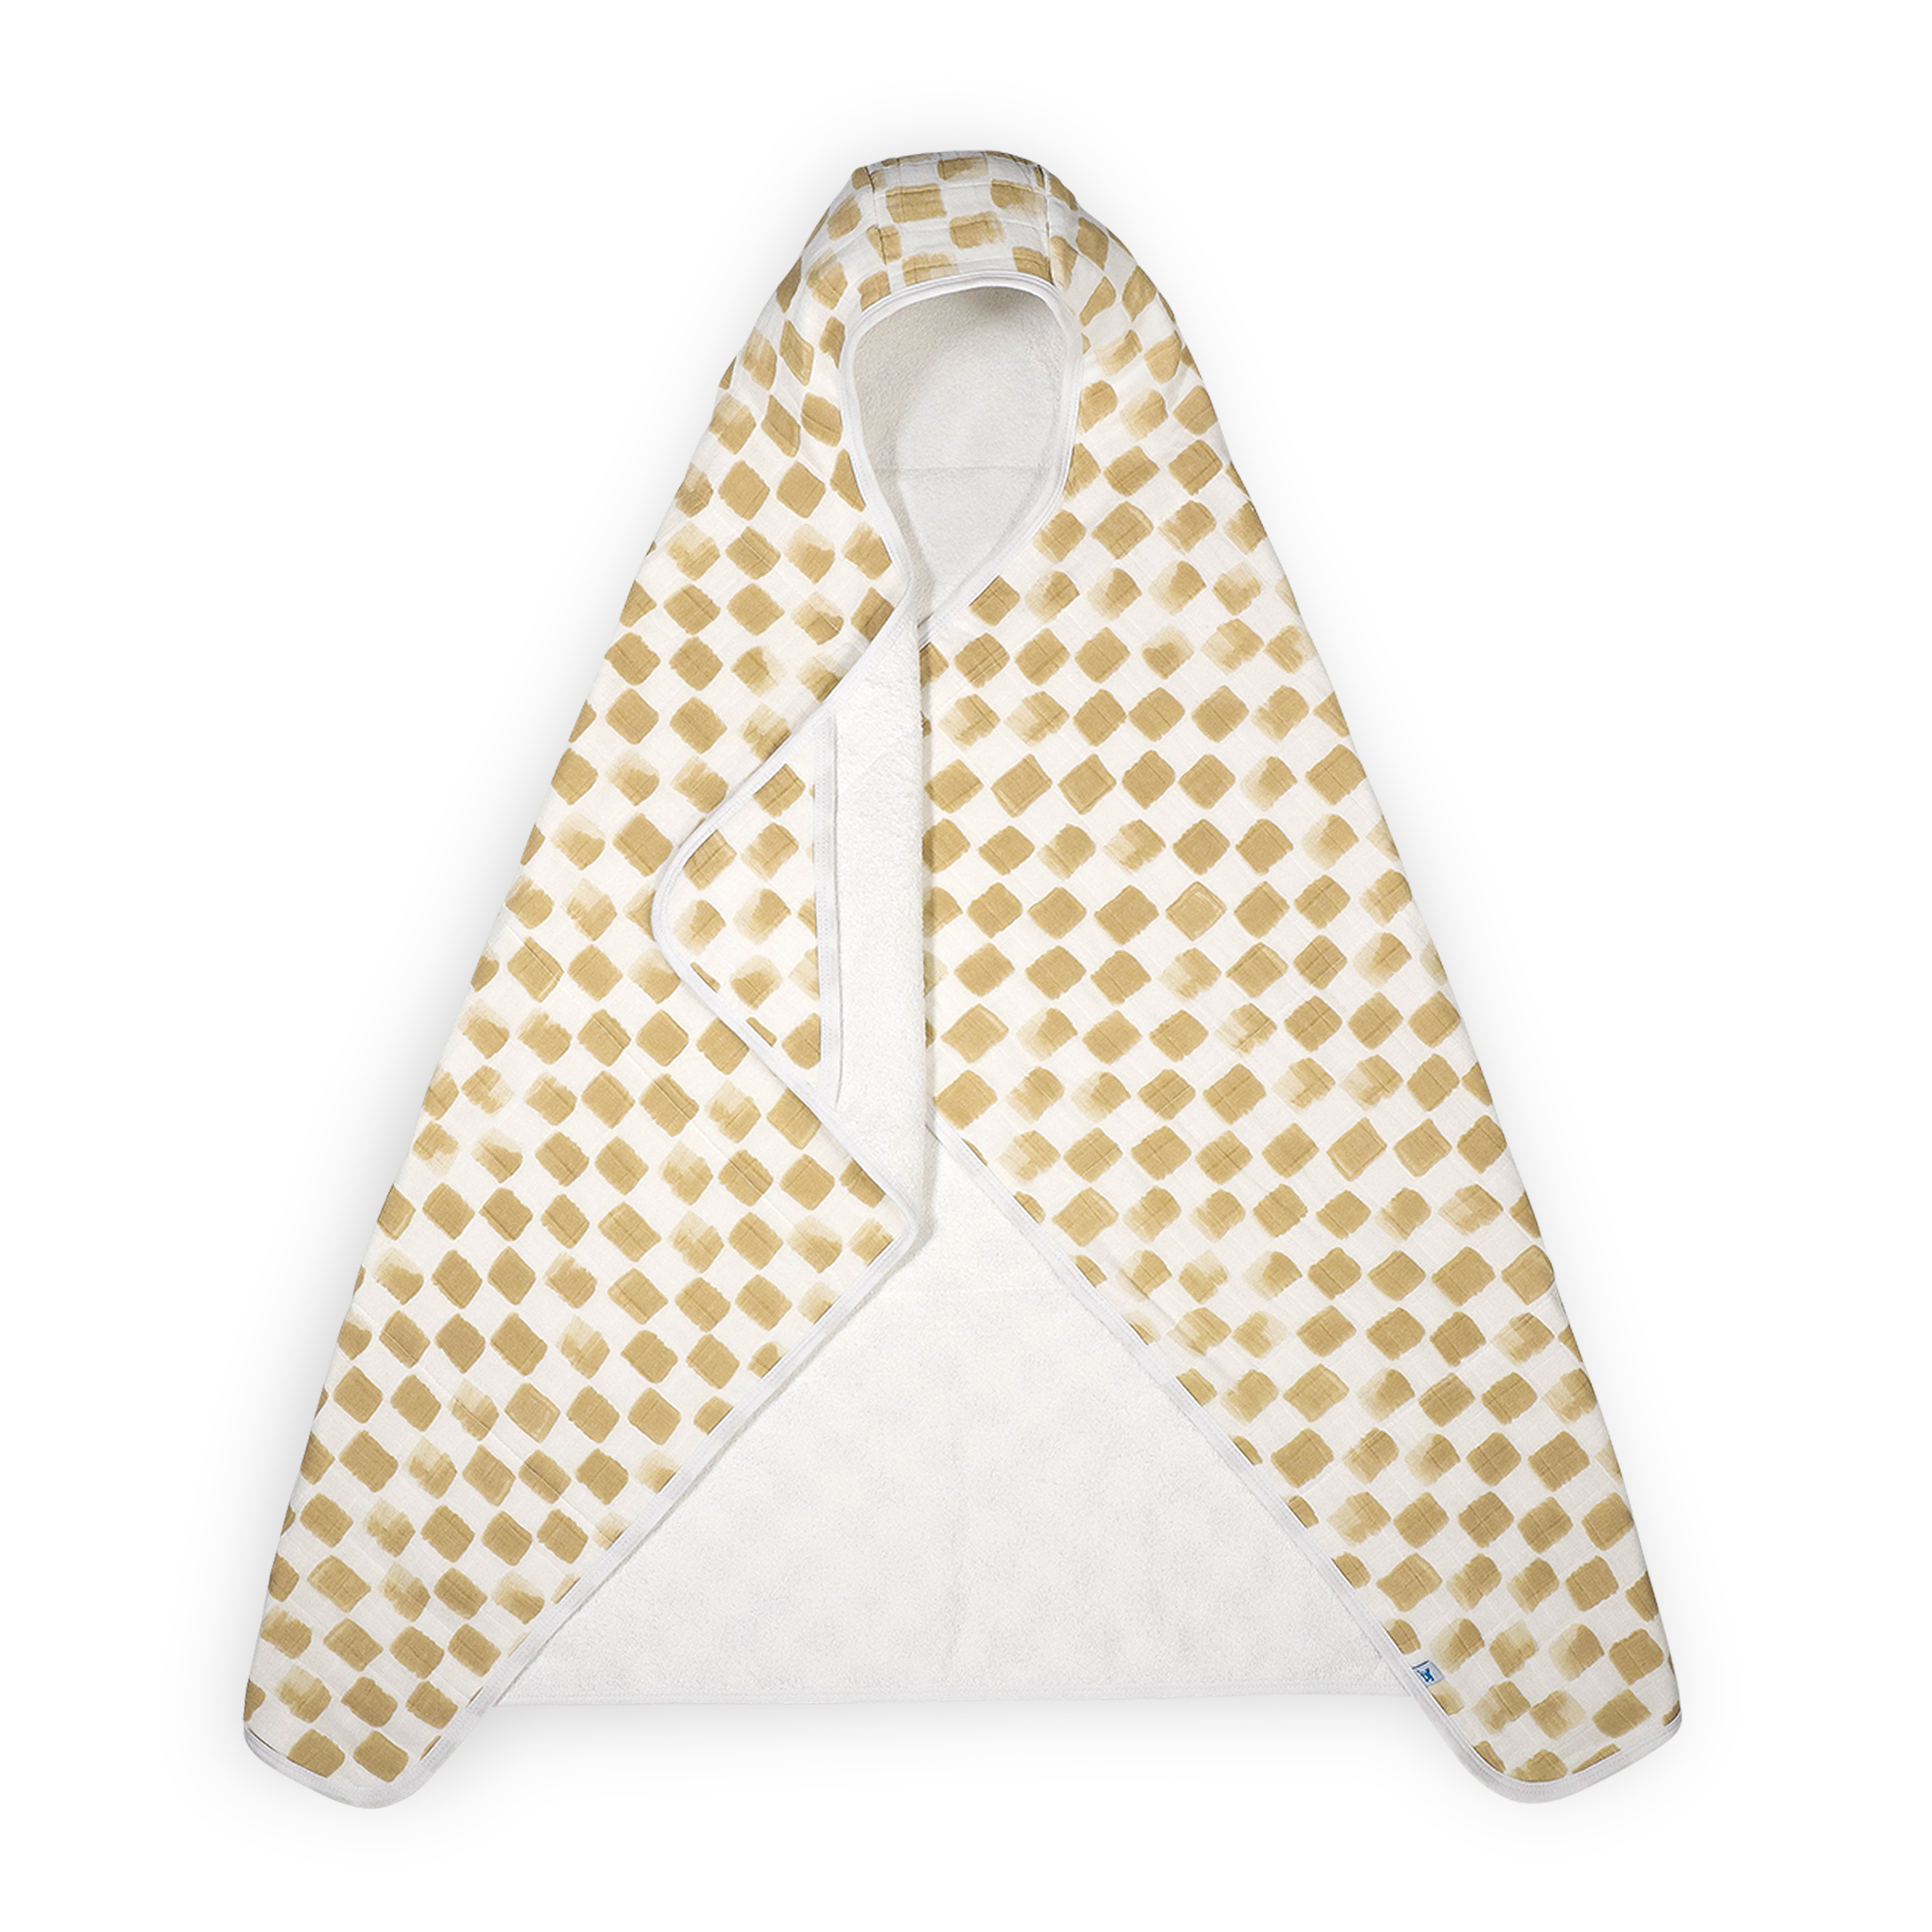 Cotton Hooded Toddler Towel - Adobe Checker